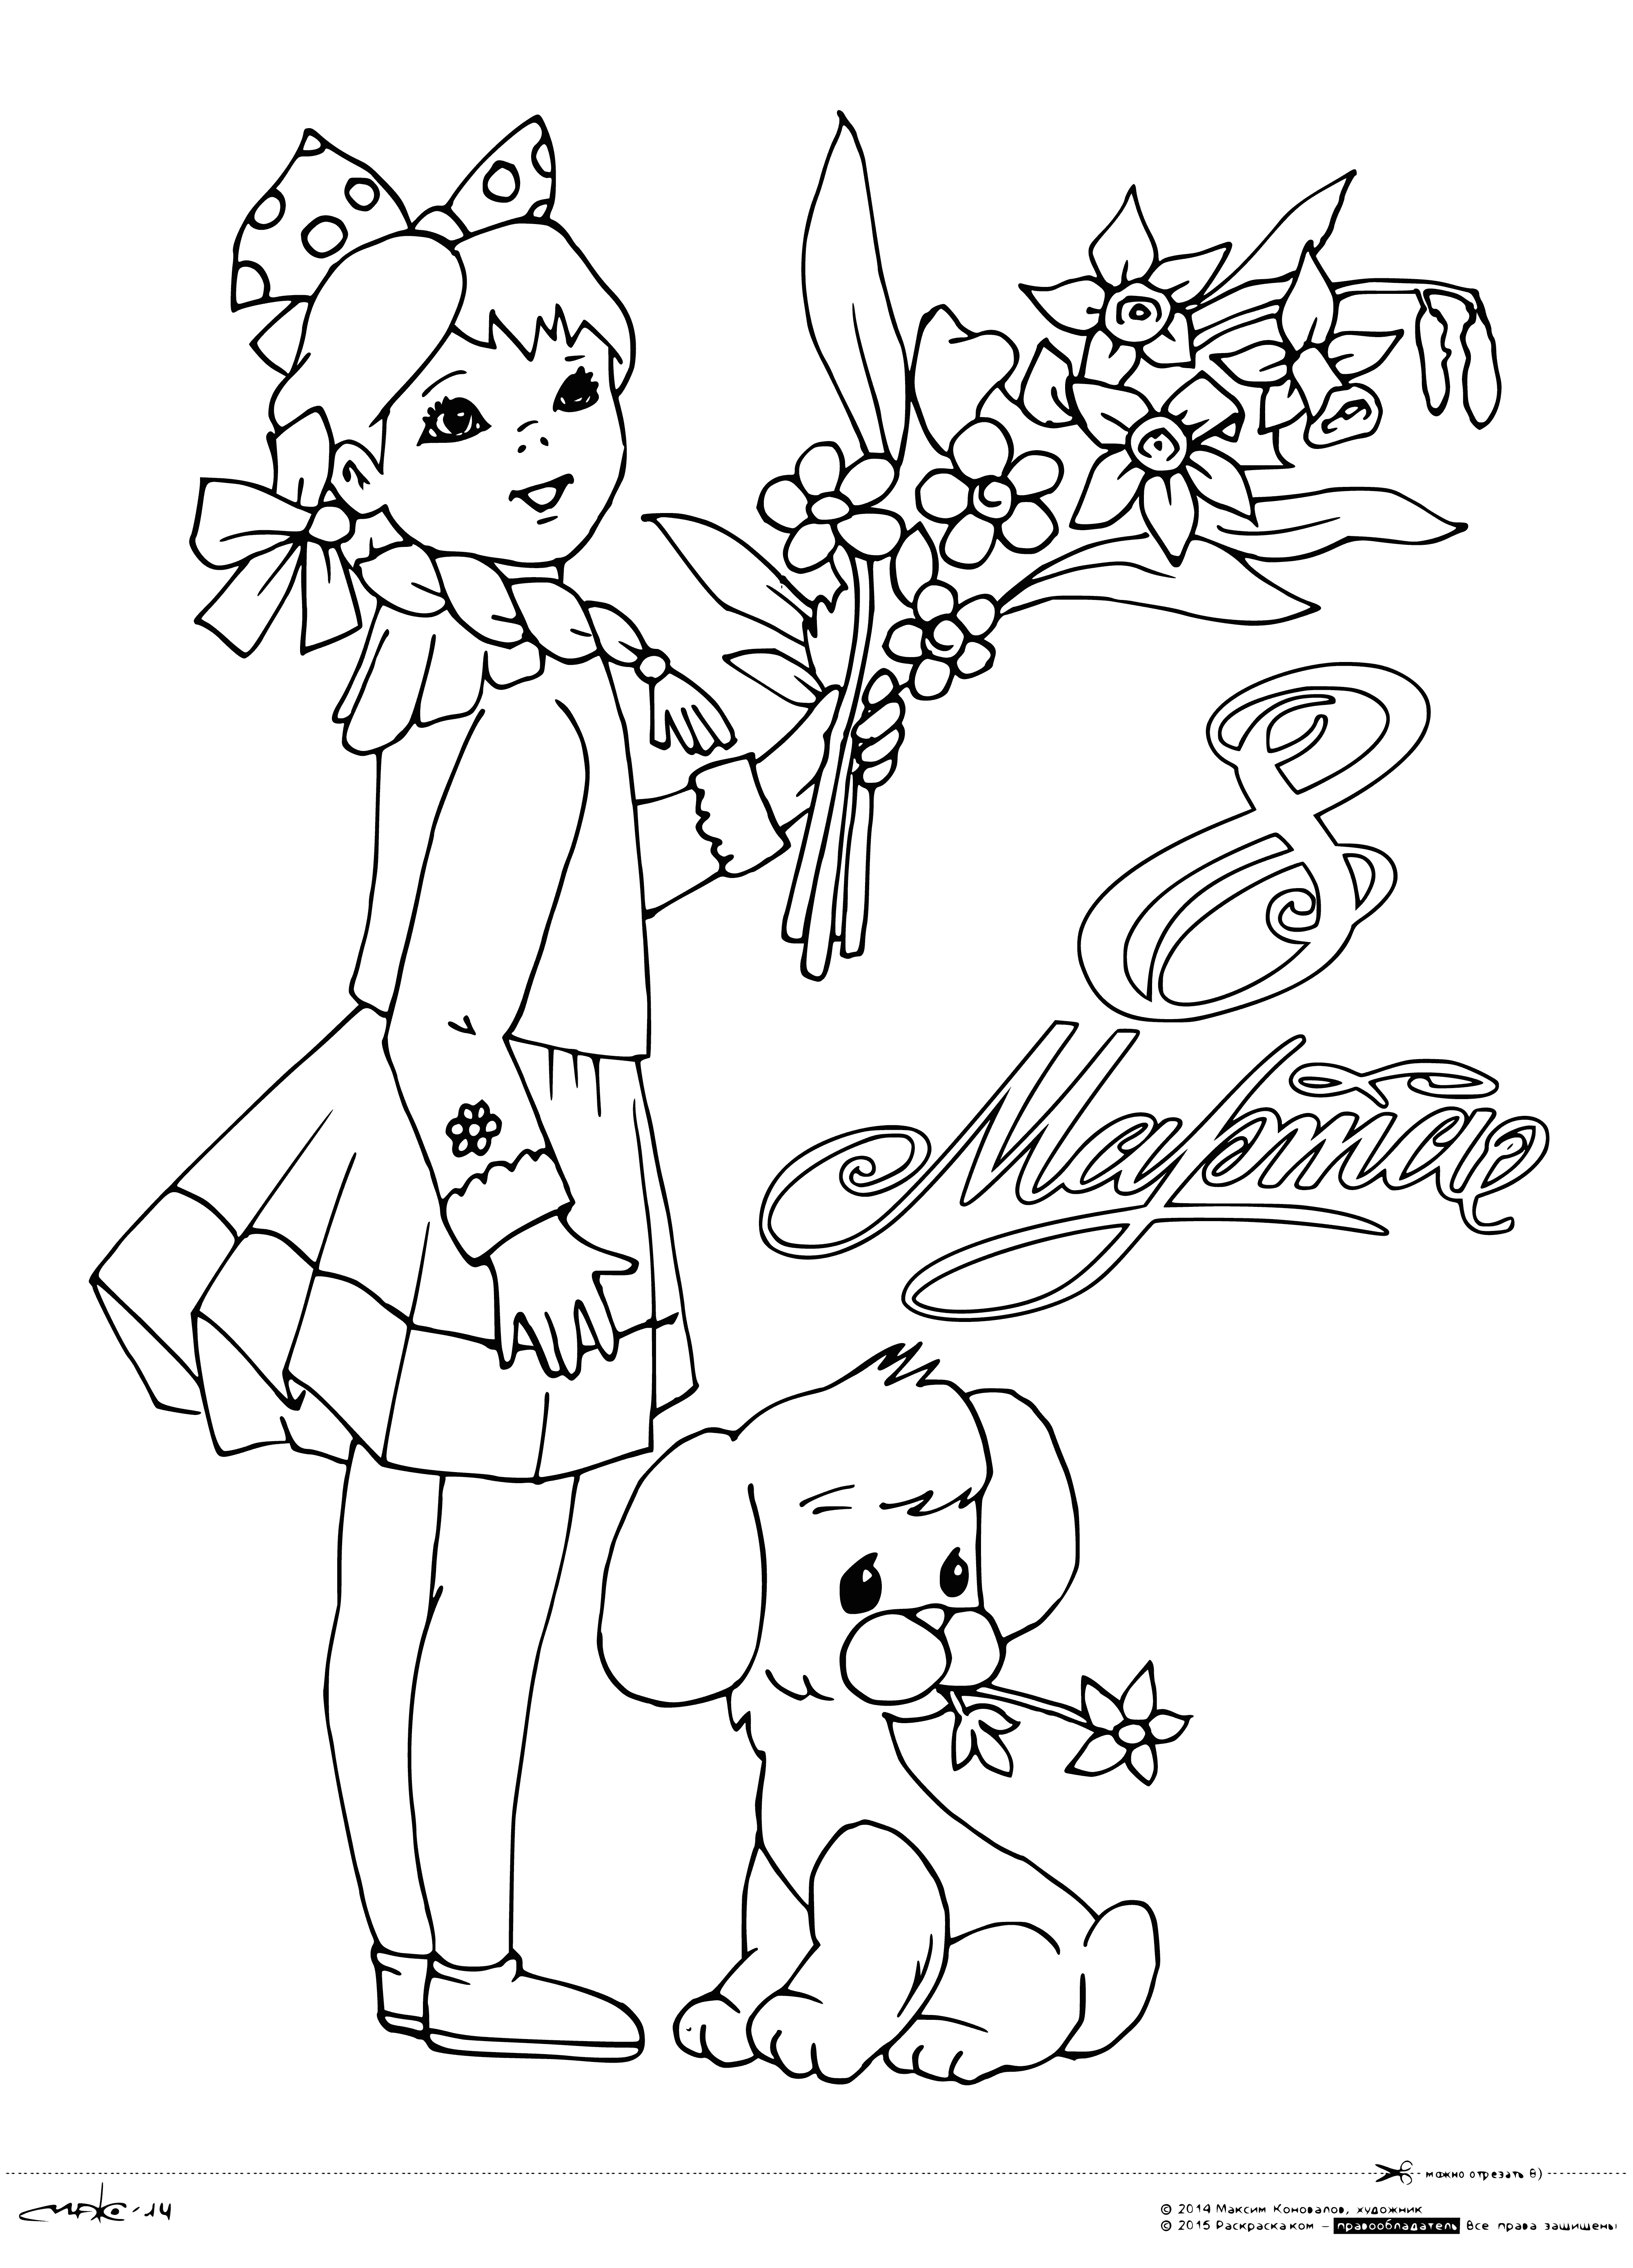 Bouquet for March 8 coloring page